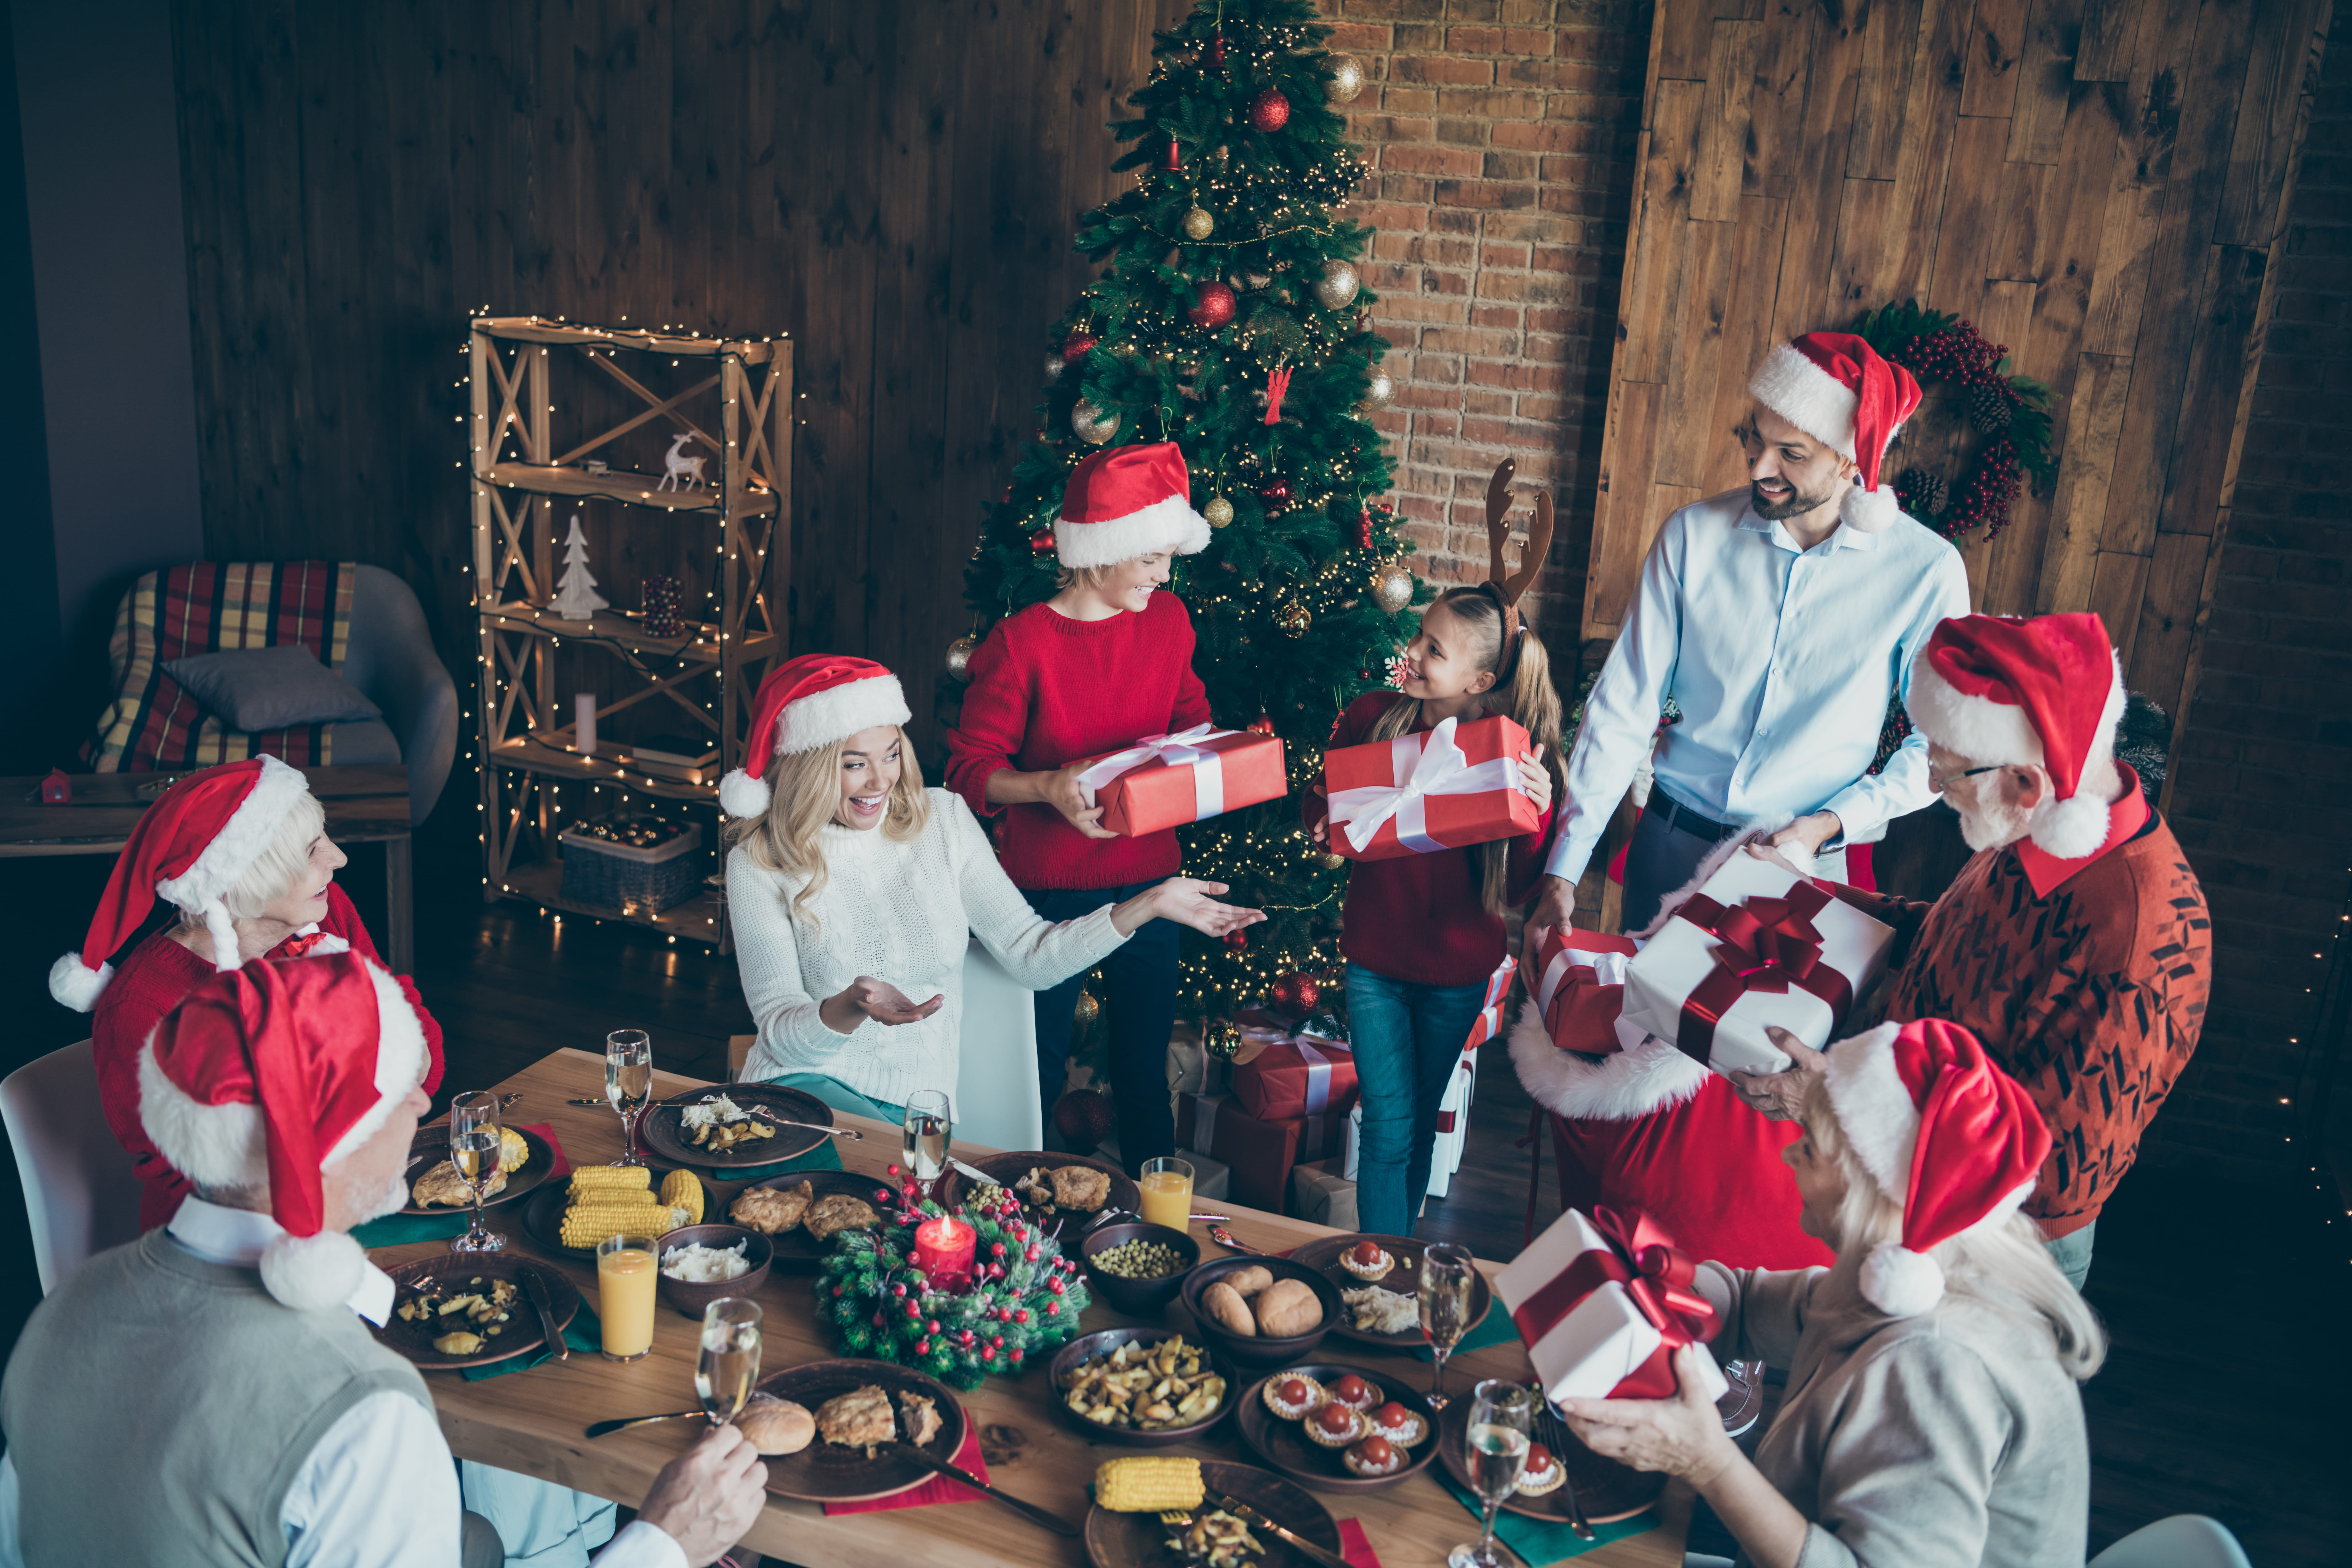 Family members exchanging gifts on Christmas | Source: Shutterstock